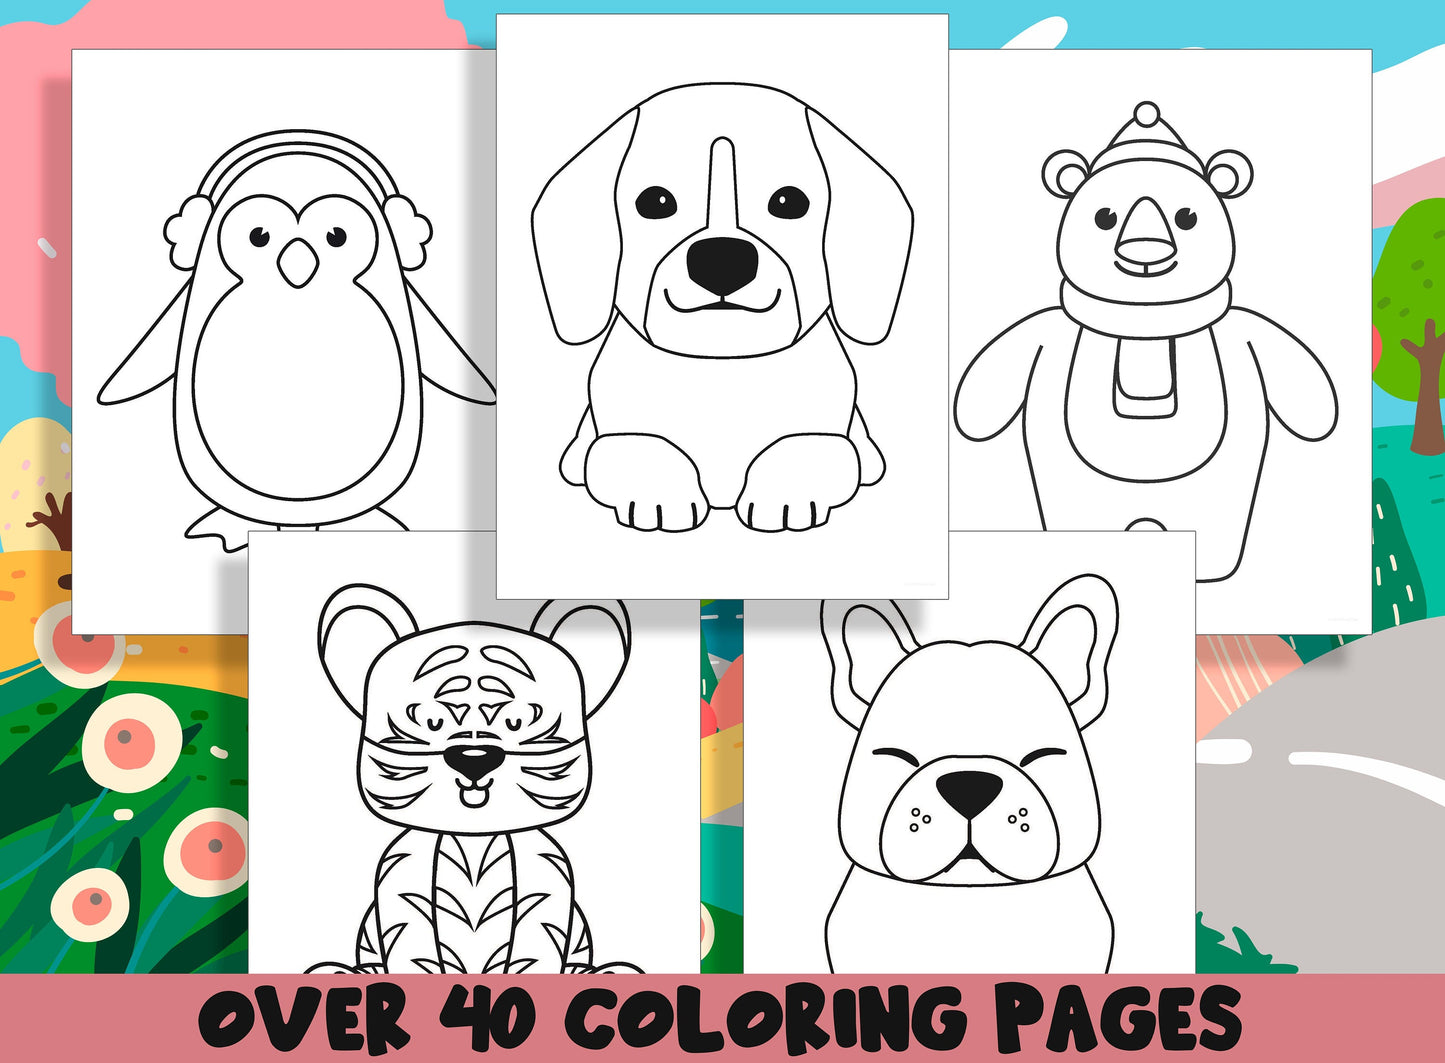 Animal Coloring Book, 40 Printable Animal Coloring Pages for Preschool, Kindergarten and Elementary School Children to Print and Color.